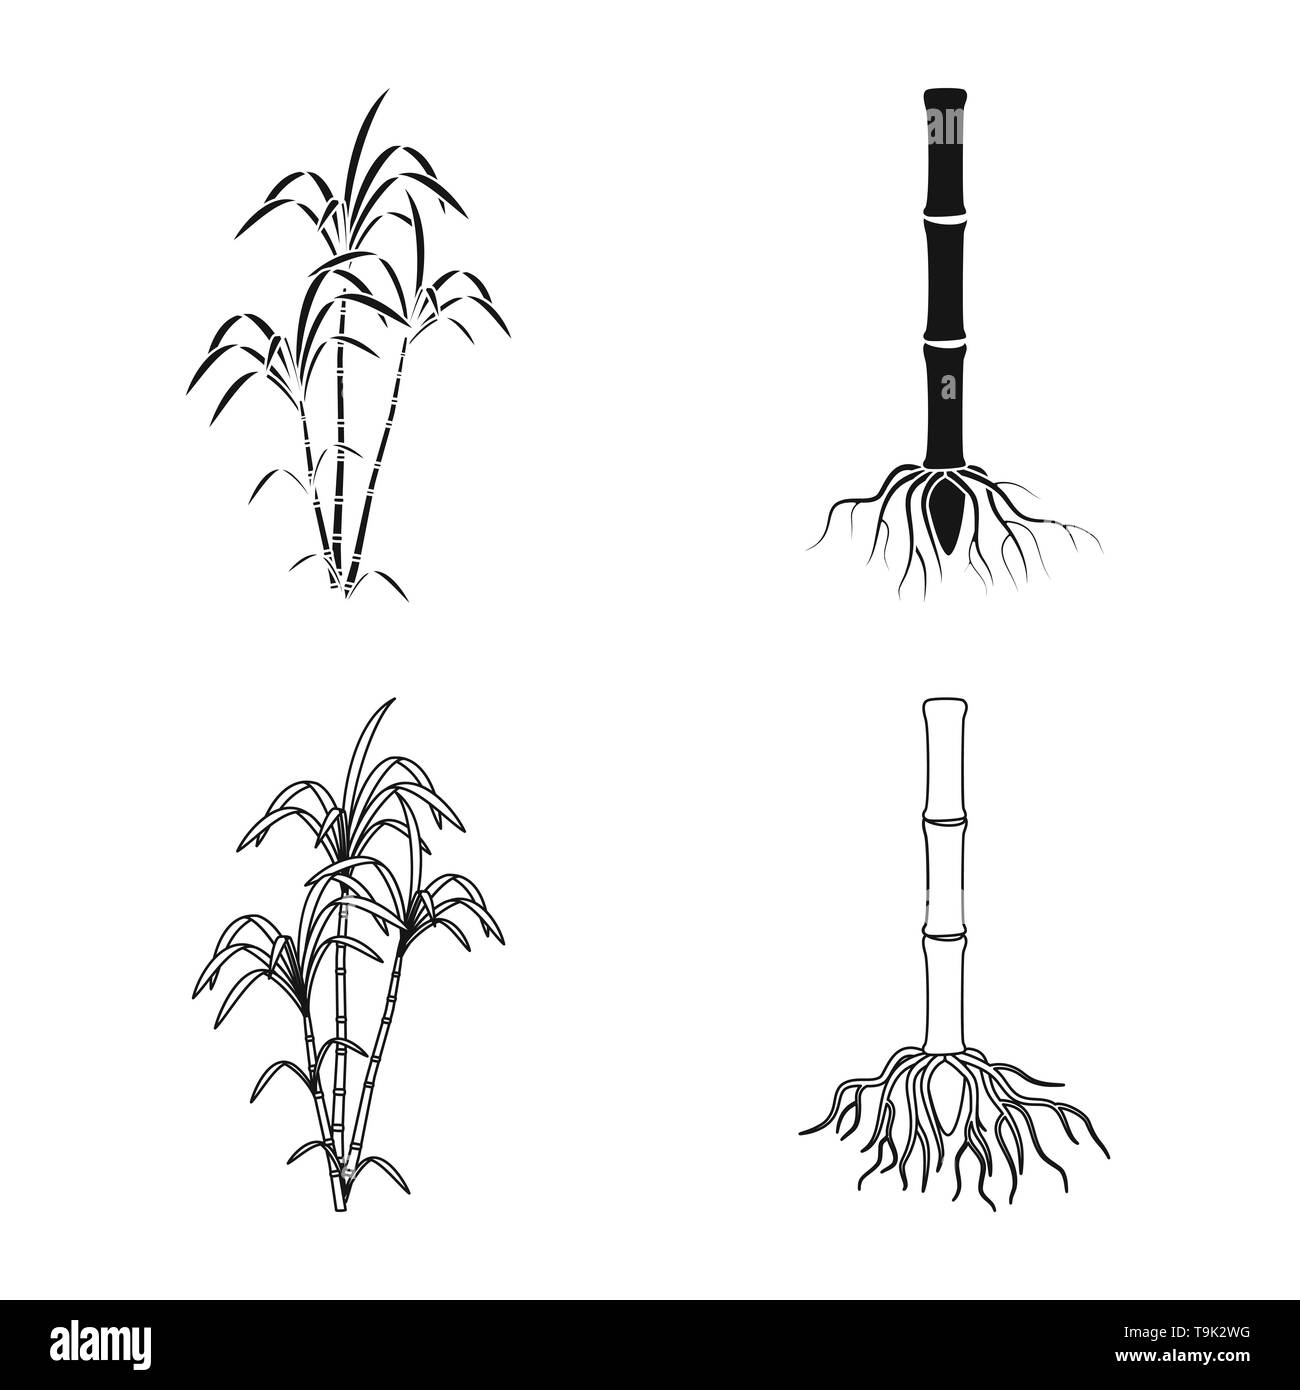 bush,root,palm,system,growth,stem,branch,sprout,juice,underground,leaf,eco,pillar,process,green,development,africa,basis,india,organic,farm,agriculture,sucrose,technology,sugarcane,cane,sugar,field,plant,plantation,set,vector,icon,illustration,isolated,collection,design,element,graphic,sign, Vector Vectors , Stock Vector